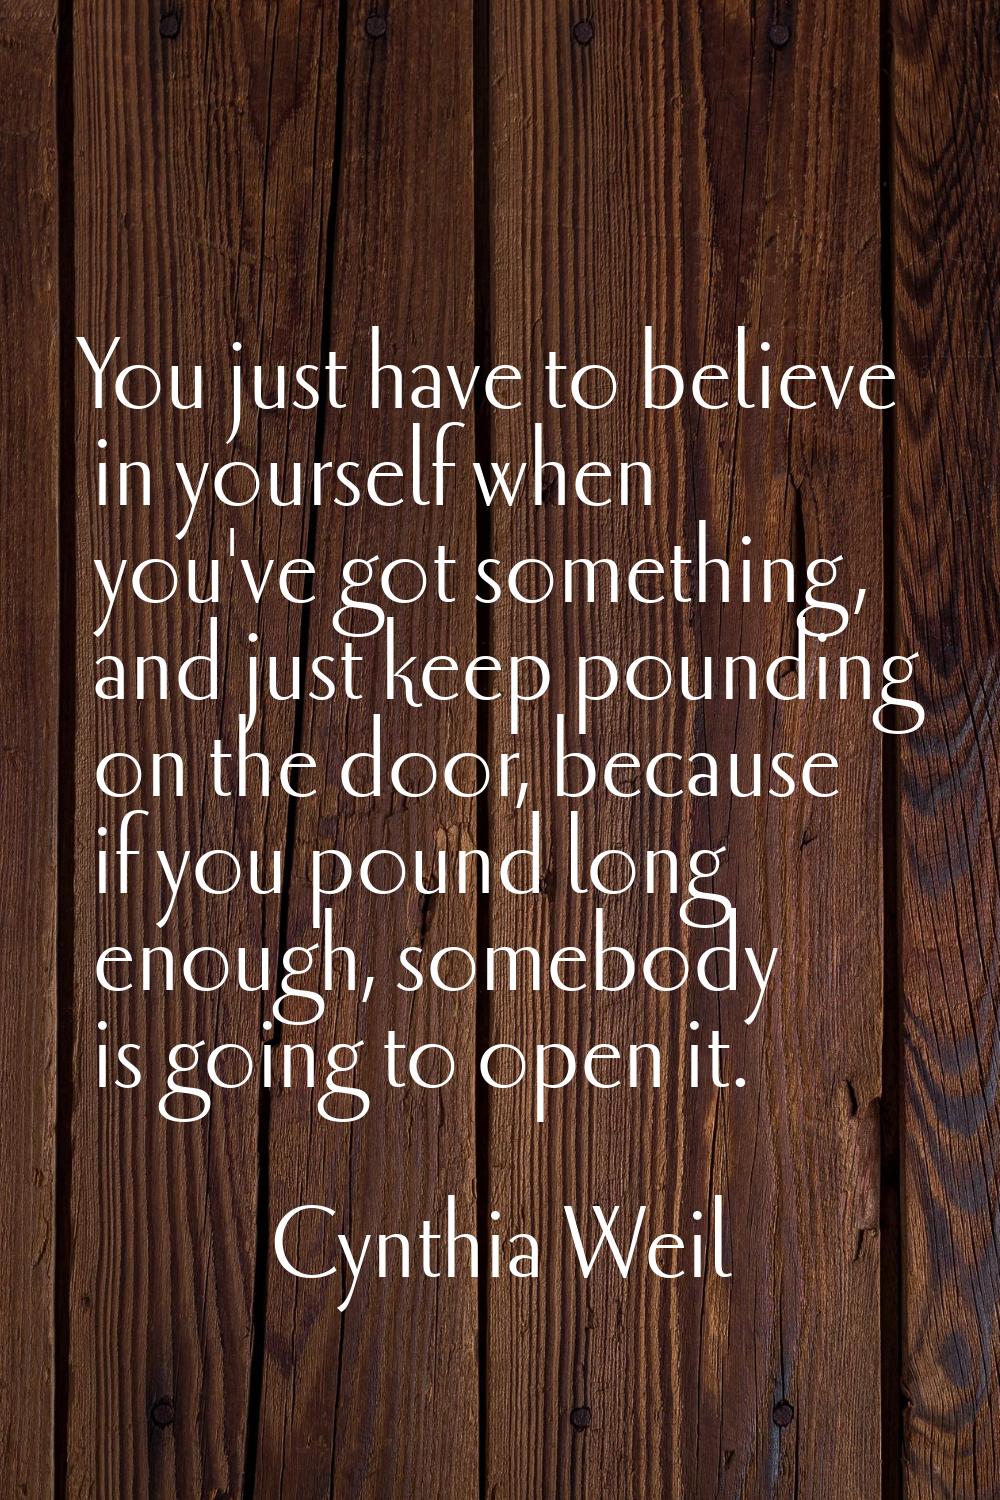 You just have to believe in yourself when you've got something, and just keep pounding on the door,